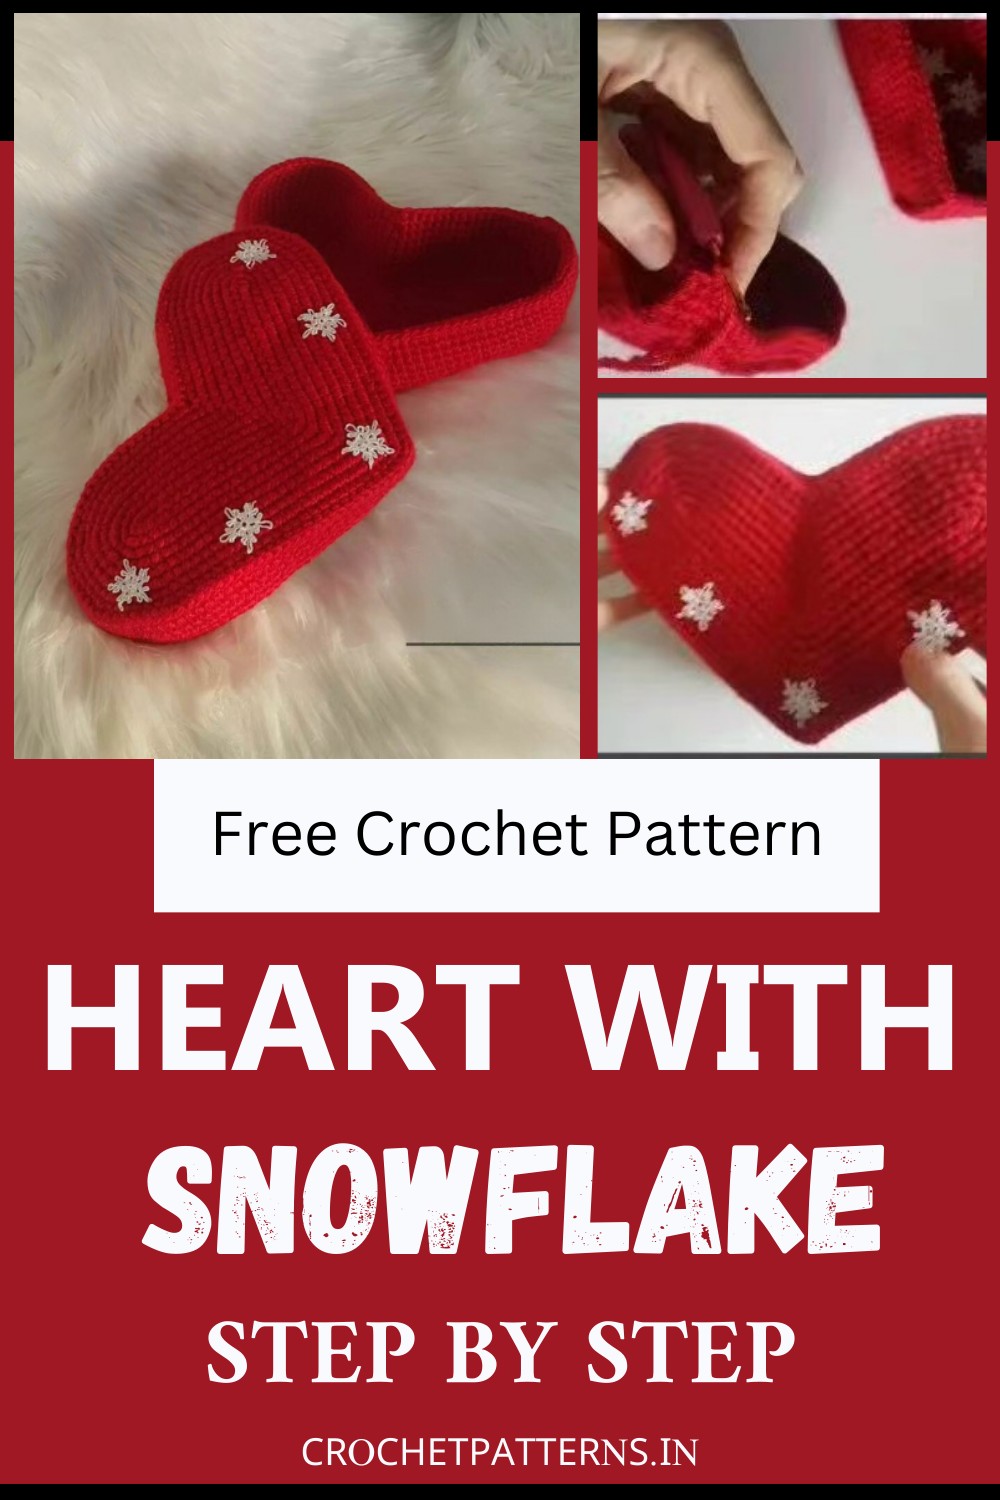 Free Crochet Heart With Snowflake Pattern